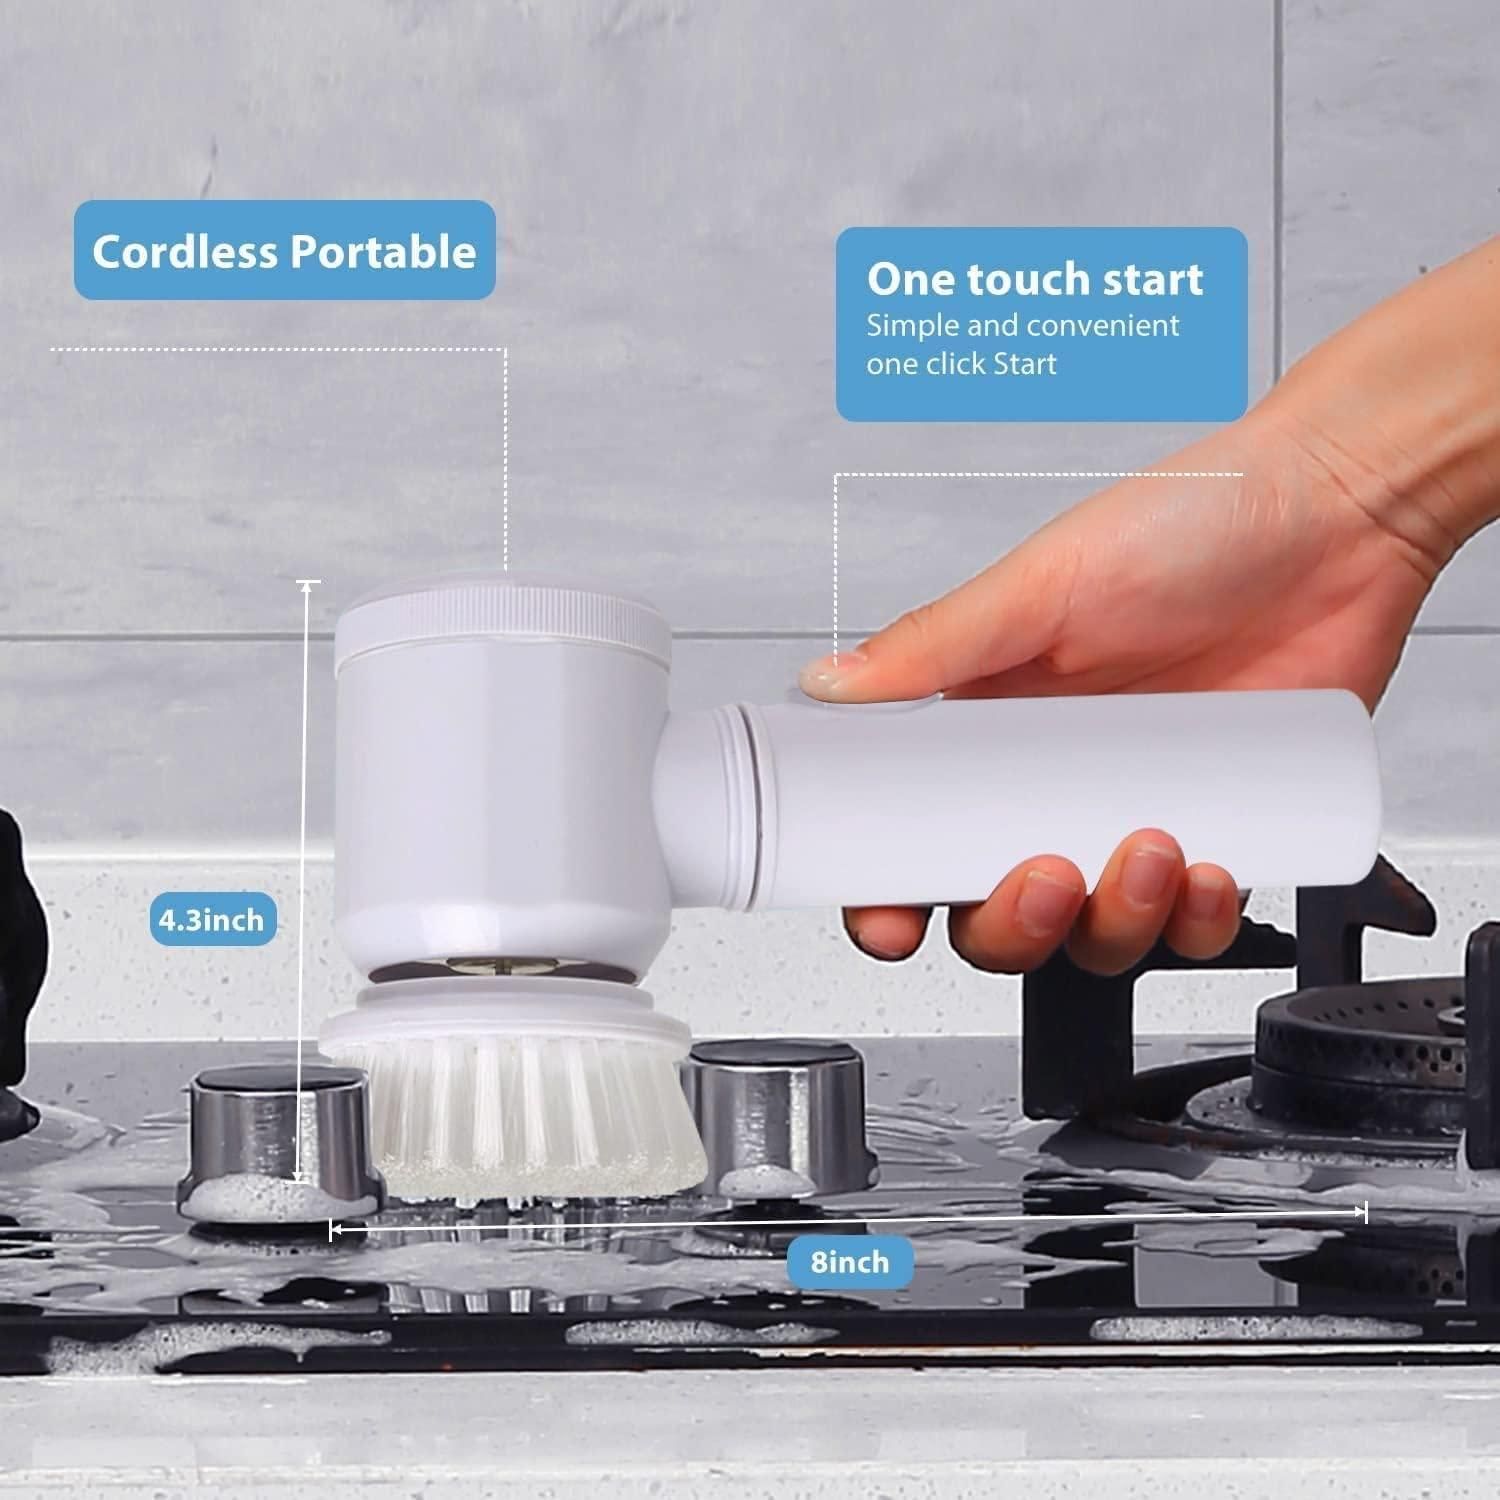 The white handheld cleaning brush is cleaning a stove, and the image shows that it is cordless and portable, as well as a one touch start which makes it simple and convenient to use.